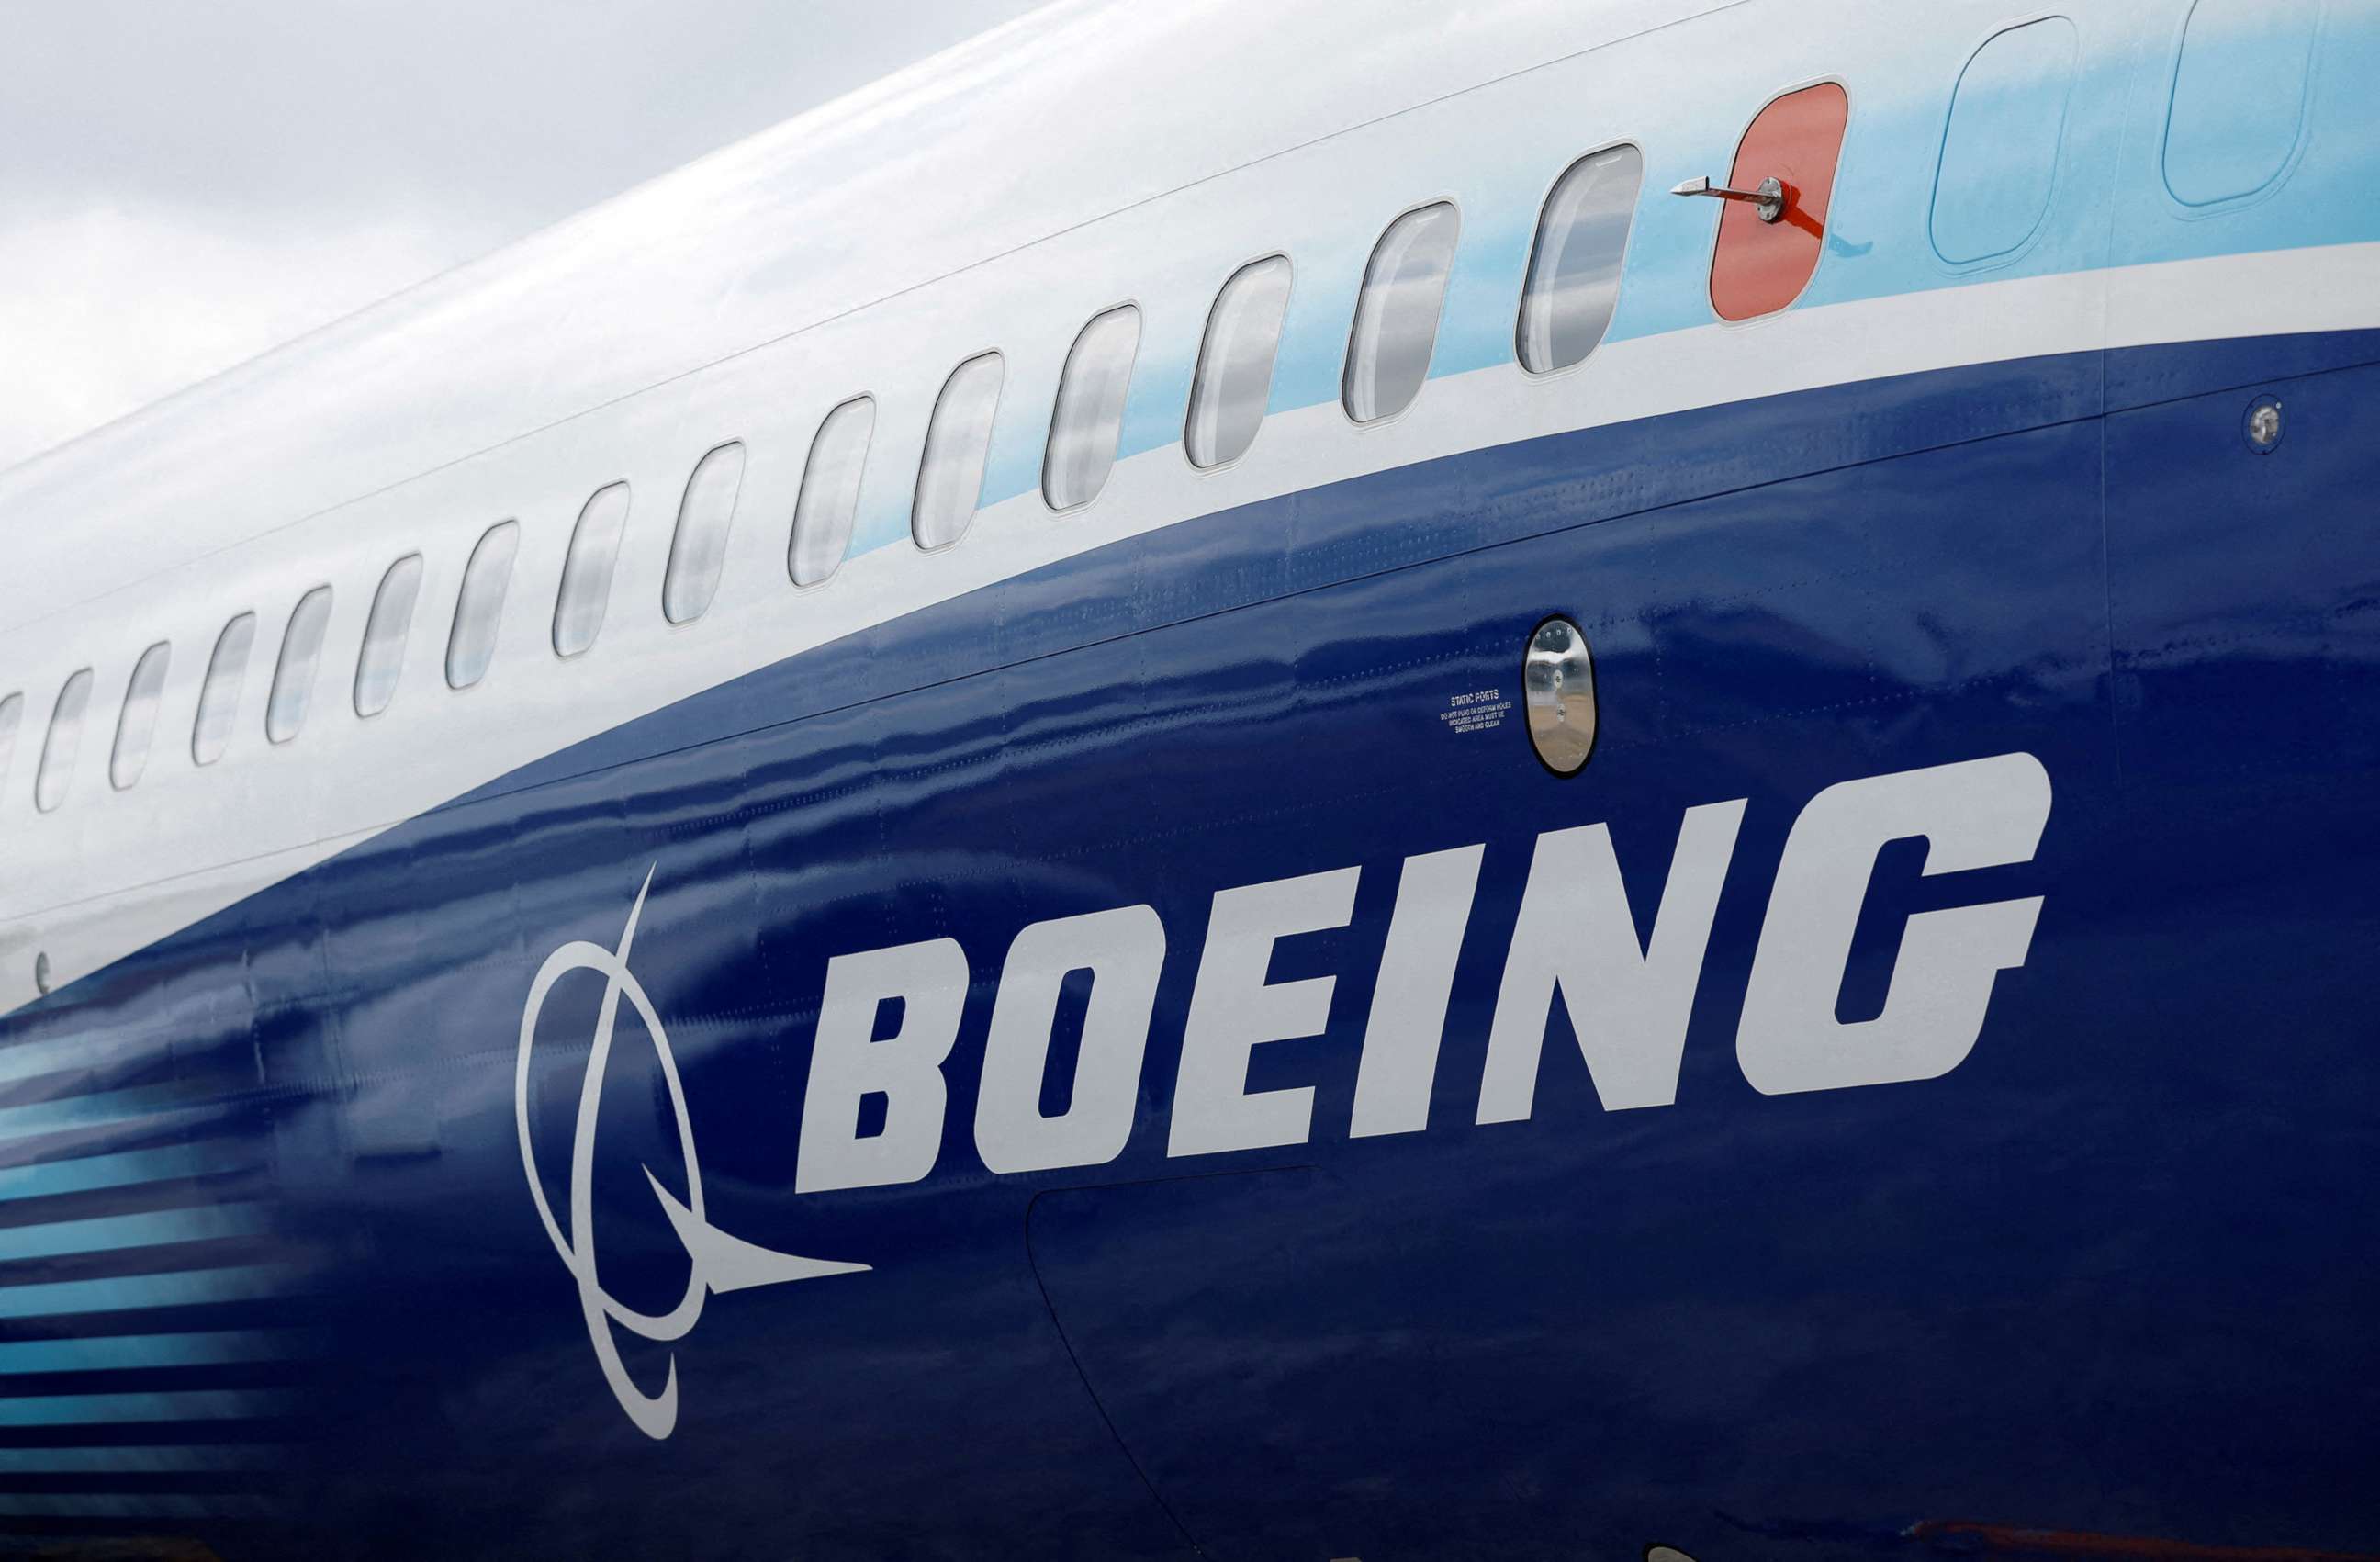 PHOTO: The Boeing logo is seen on the side of a Boeing 737 MAX at the Farnborough International Airshow in Farnborough, Britain, July 20, 2022.